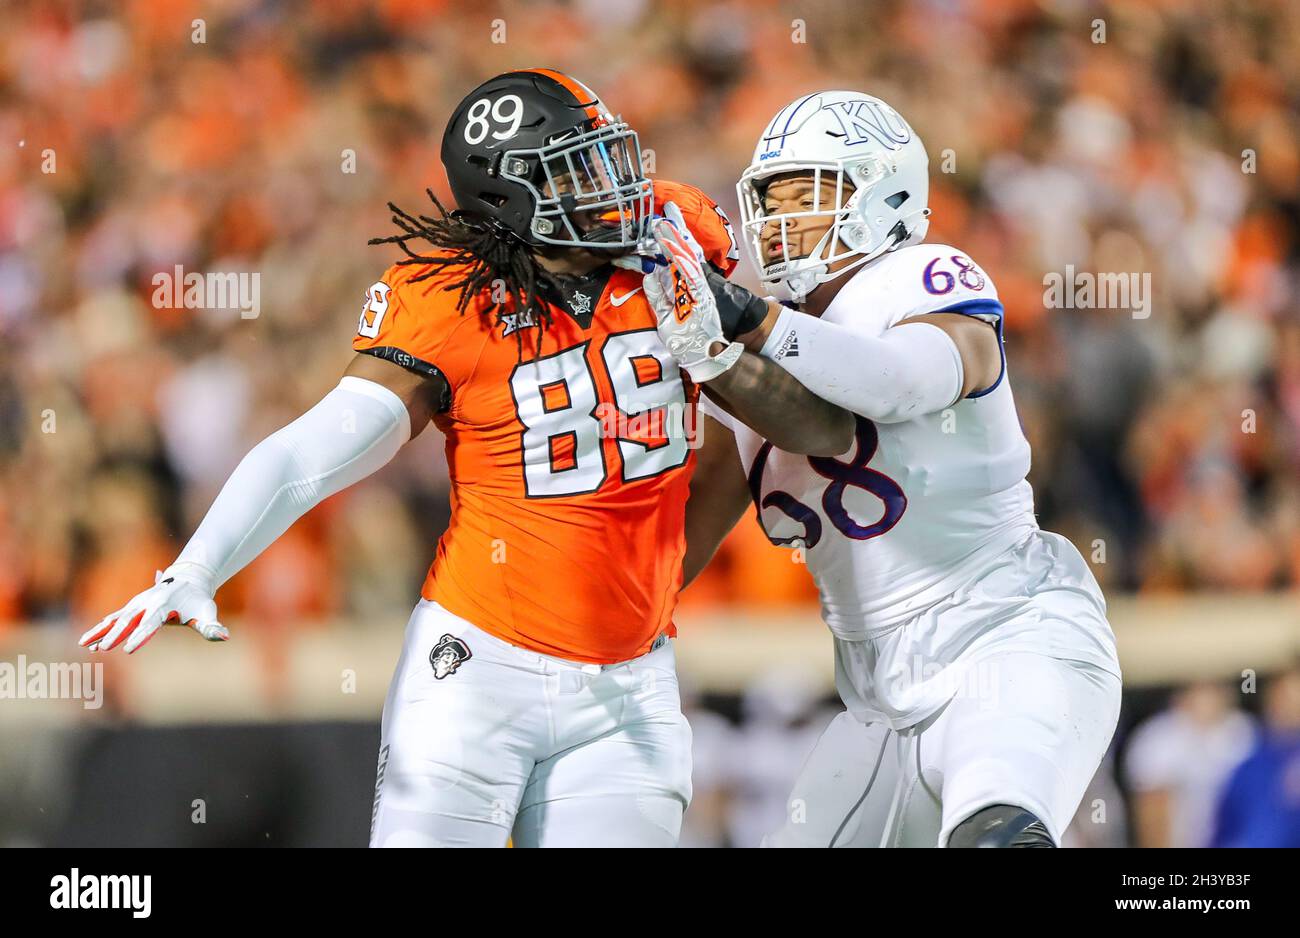 October 30, 2021: Oklahoma State defensive end Tyler Lacy (89) battles with Kansas offensive lineman Earl Bostick Jr. (68) during a football game between the Kansas Jayhawks and the Oklahoma State Cowboys at Boone Pickens Stadium in Stillwater, OK. Gray Siegel/CSM Stock Photo